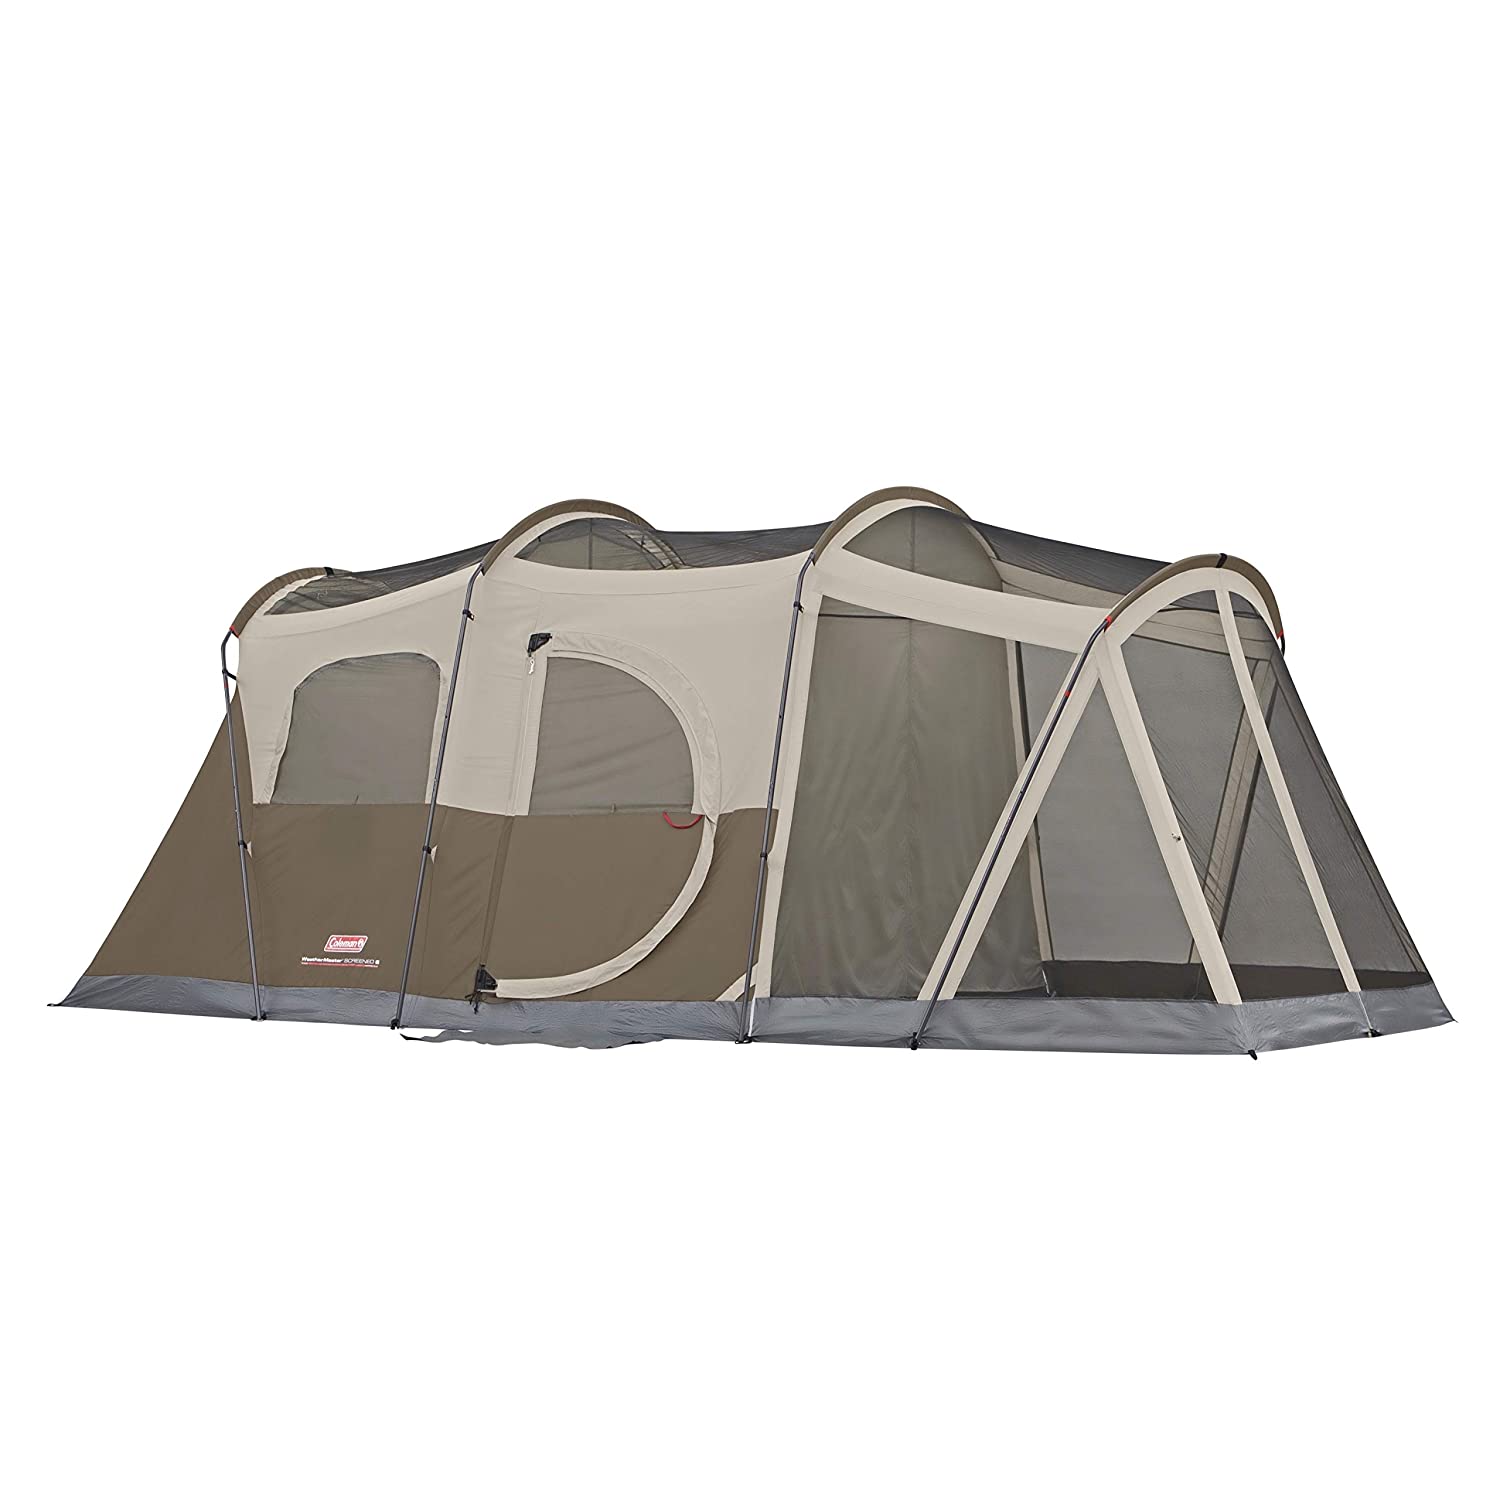 Thumbnail of Coleman Tent with Screen Room.